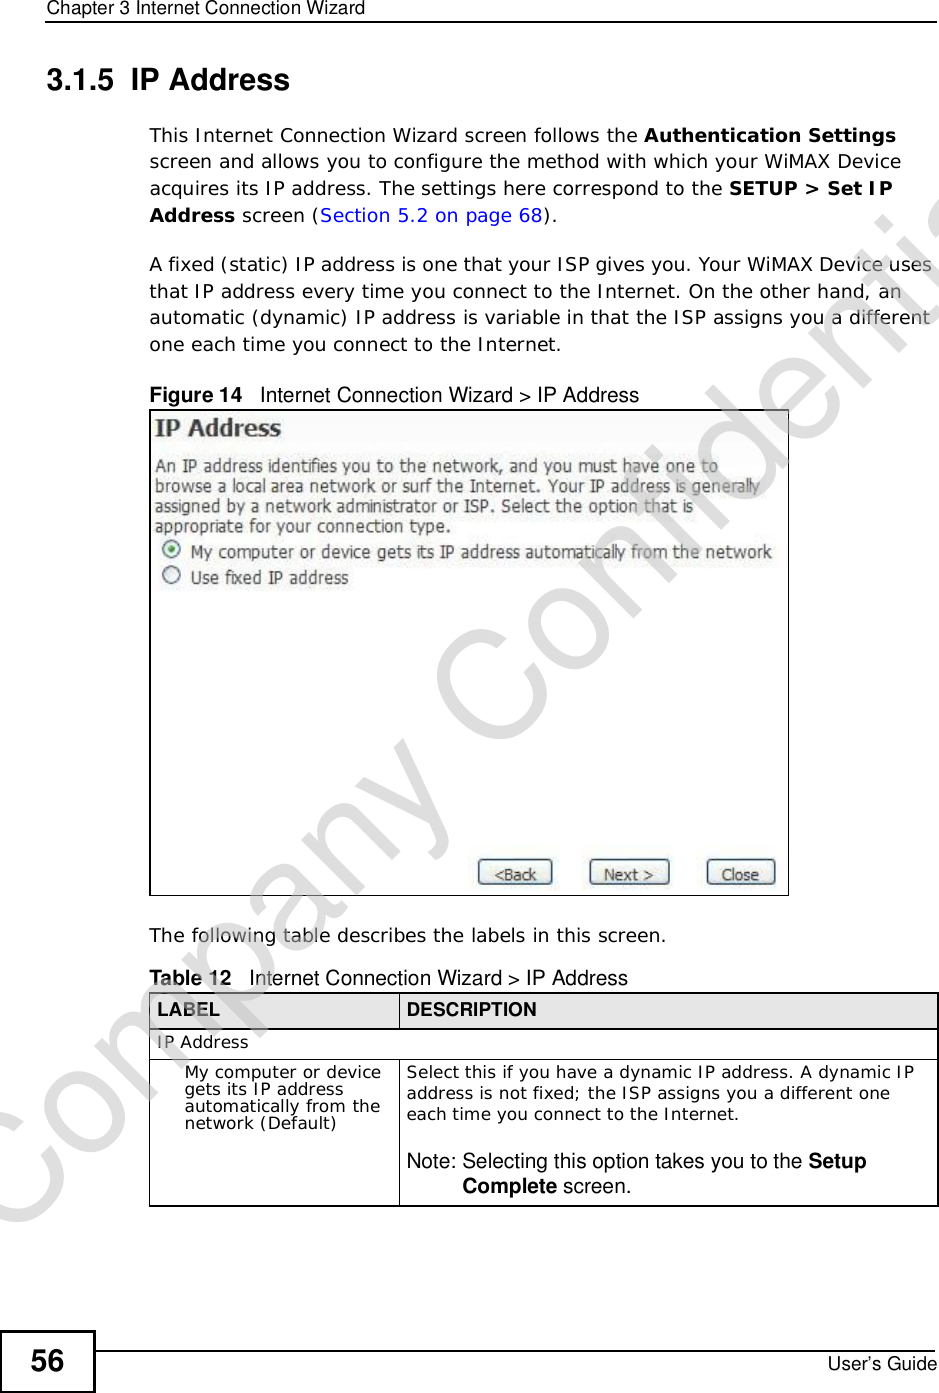 Chapter 3Internet Connection WizardUser’s Guide563.1.5  IP AddressThis Internet Connection Wizard screen follows the Authentication Settingsscreen and allows you to configure the method with which your WiMAX Device acquires its IP address. The settings here correspond to the SETUP &gt; Set IP Address screen (Section 5.2 on page 68).A fixed (static) IP address is one that your ISP gives you. Your WiMAX Device uses that IP address every time you connect to the Internet. On the other hand, an automatic (dynamic) IP address is variable in that the ISP assigns you a different one each time you connect to the Internet.Figure 14   Internet Connection Wizard &gt; IP AddressThe following table describes the labels in this screen.Table 12   Internet Connection Wizard &gt; IP AddressLABEL DESCRIPTIONIP AddressMy computer or device gets its IP address automatically from the network (Default)Select this if you have a dynamic IP address. A dynamic IP address is not fixed; the ISP assigns you a different one each time you connect to the Internet.Note: Selecting this option takes you to the SetupComplete screen.Company Confidential